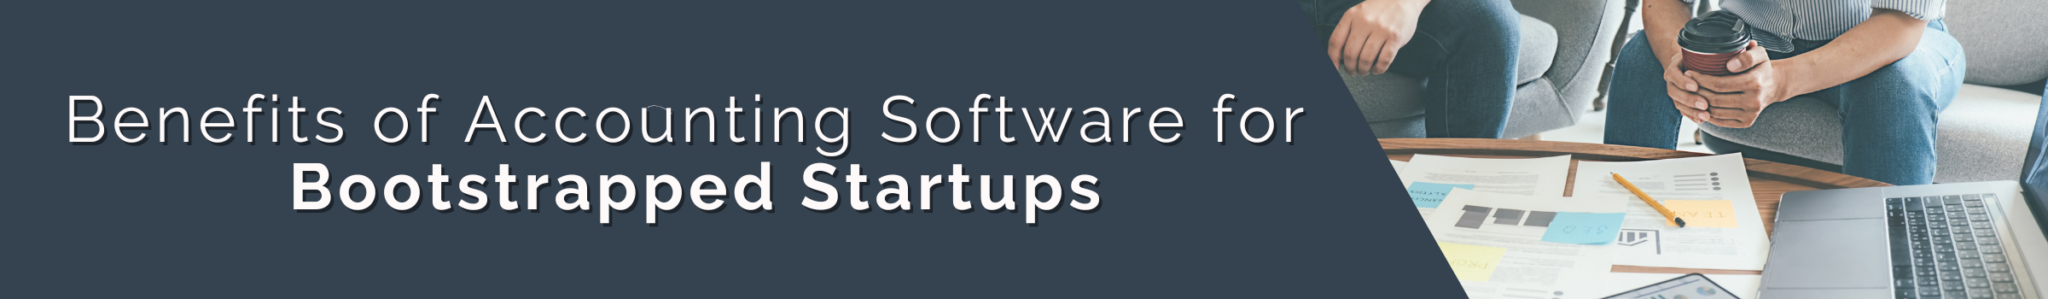 Benefits of Accounting Software for Bootstrapped Startups